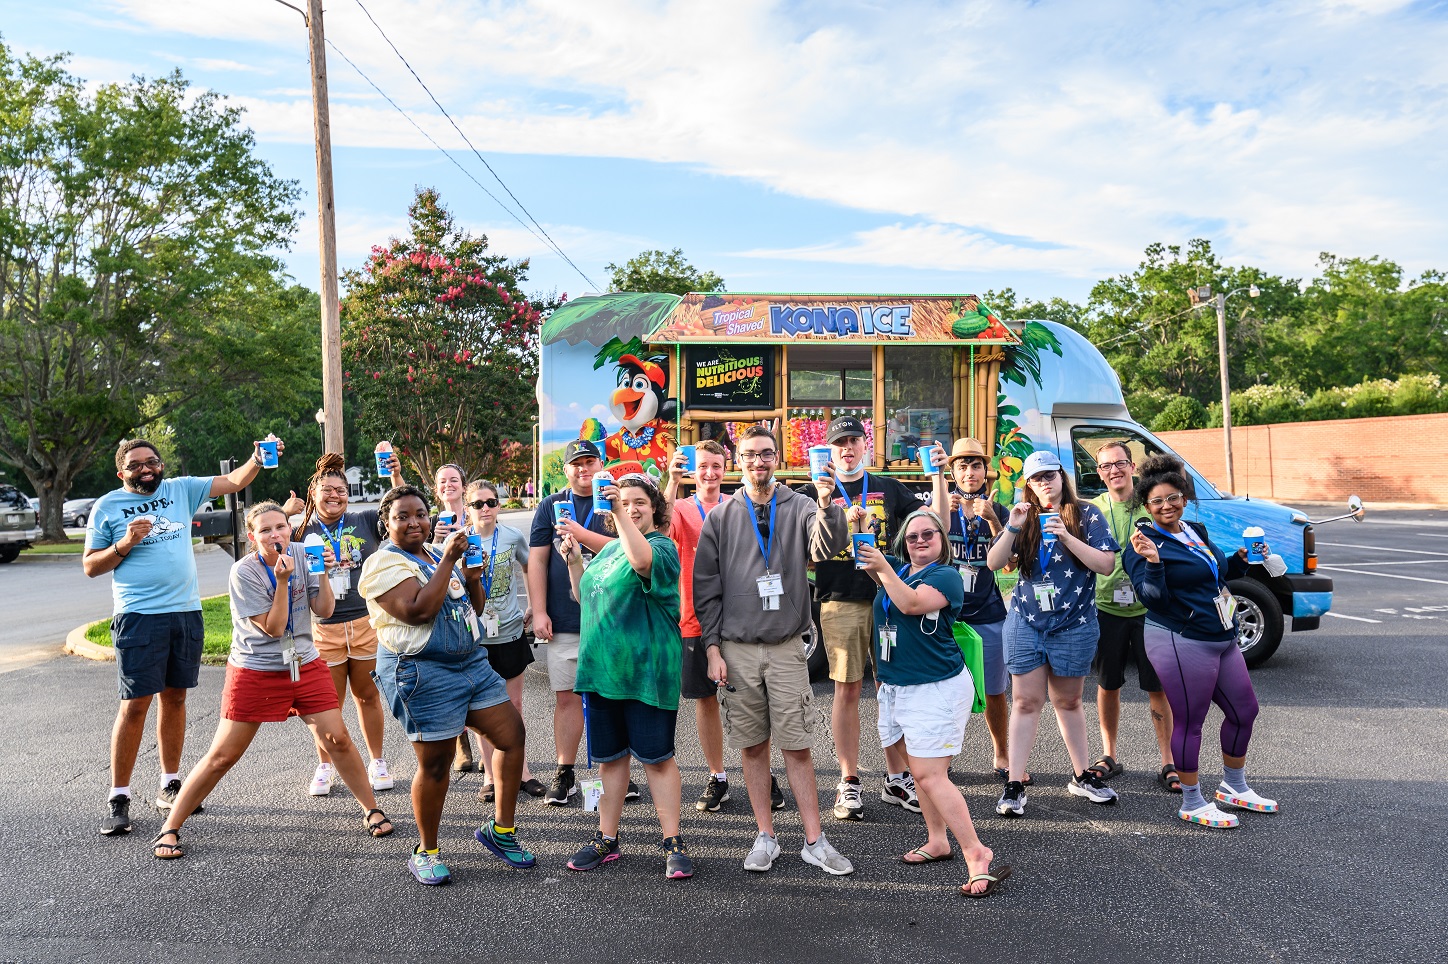 Diverse youth with disabilities and staff pose with frozen ice treats by a food truck outside.